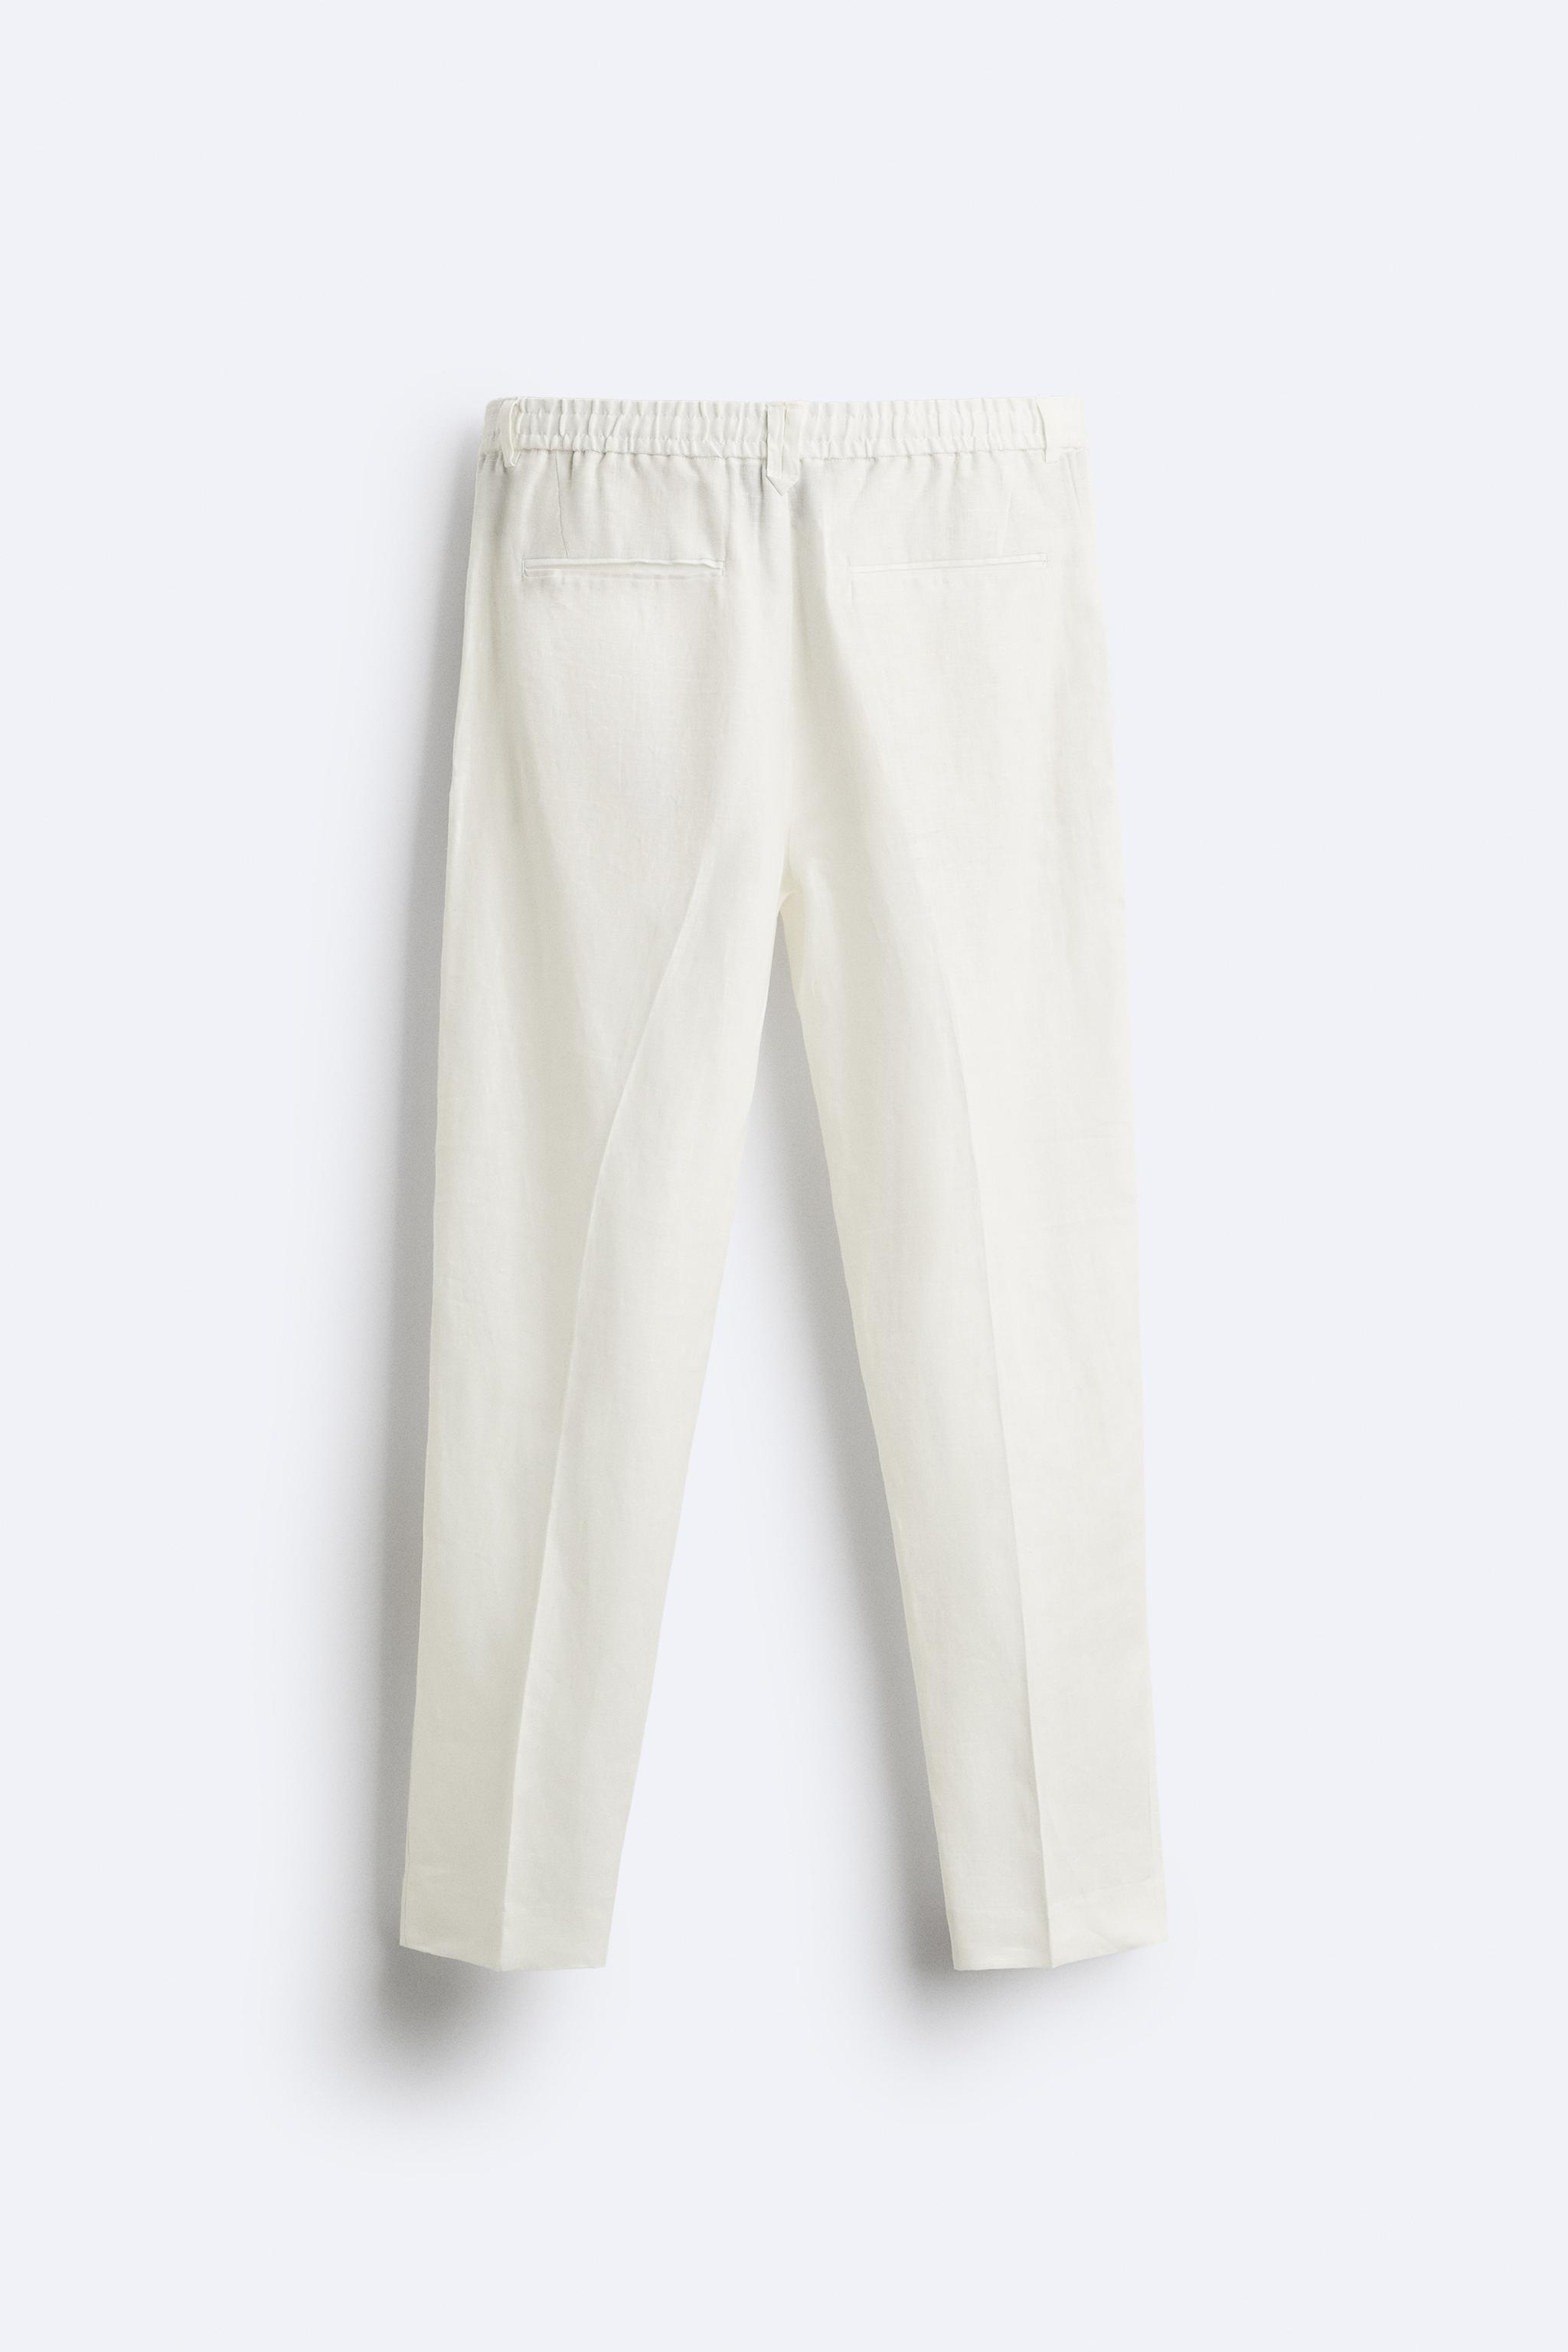 ZARA LINEN BLEND DARTED TROUSERS OYSTER WHITE SIZE XS